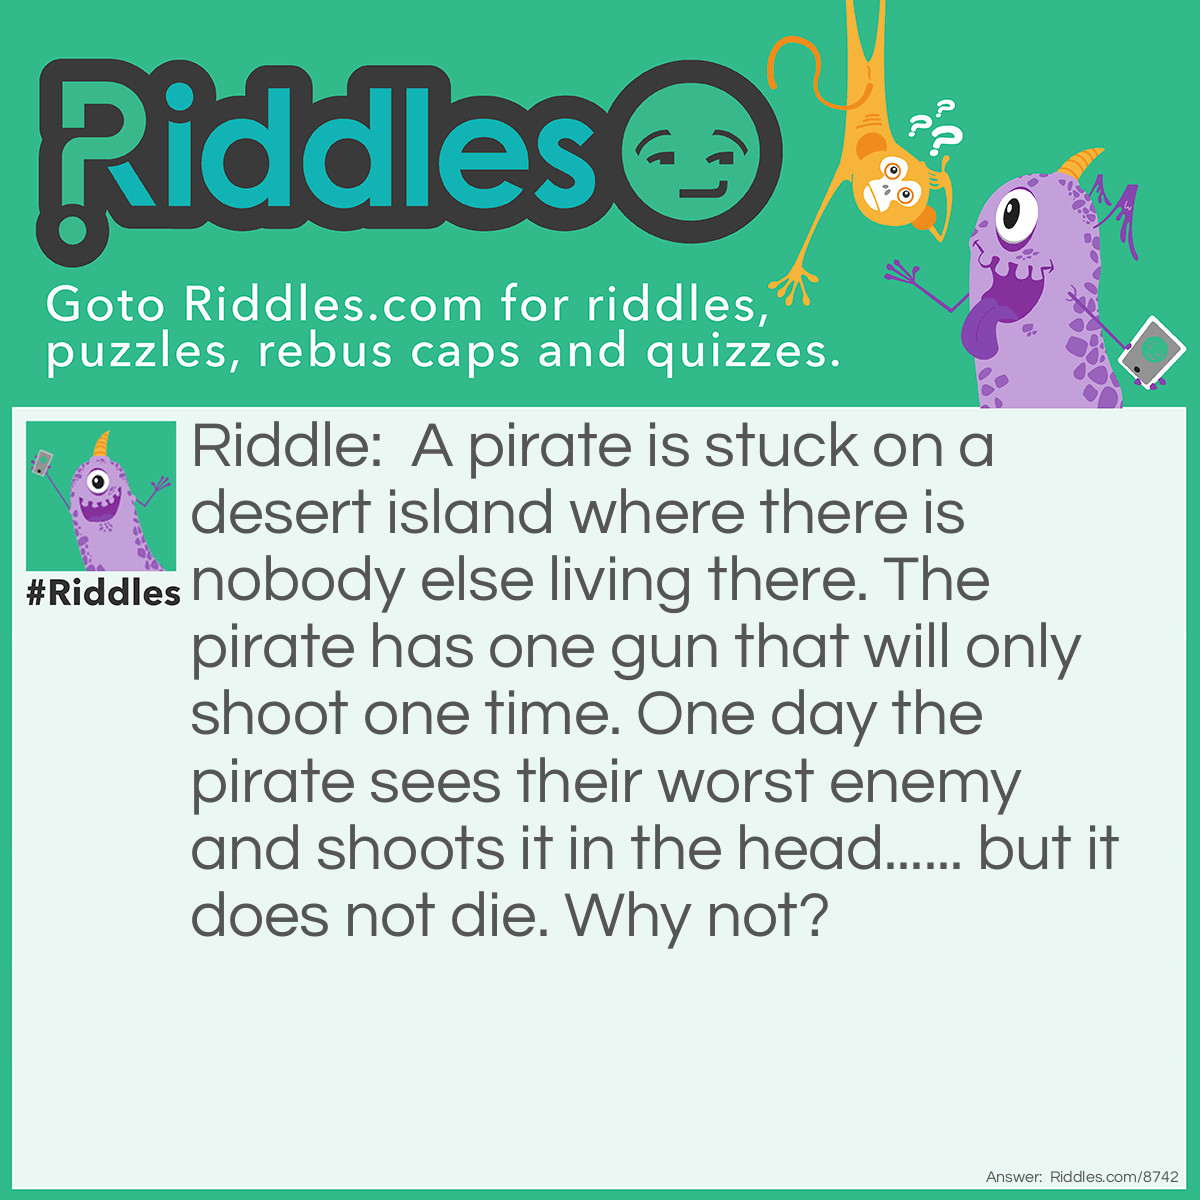 Riddle: A pirate is stuck on a desert island where there is nobody else living there. The pirate has one gun that will only shoot one time. One day the pirate sees their worst enemy and shoots it in the head...... but it does not die. Why not? Answer: The pirates worst enemy looks the same as the pirate and is also a pirate..... so the pirate had only seen their reflection and thought it was their worst enemy. So they shot the gun at the sea which did not die.